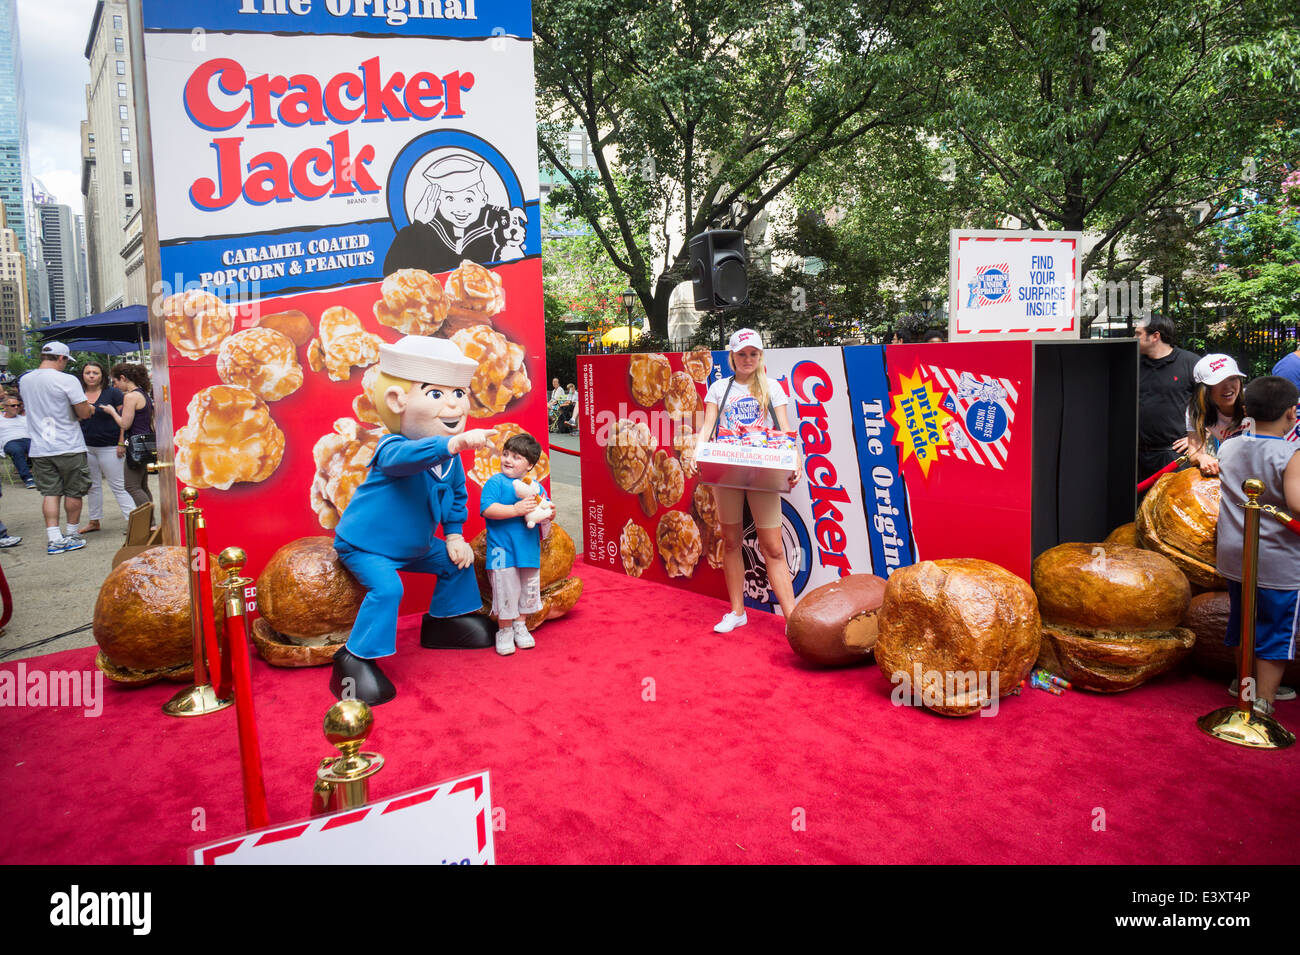 A promotional event for the iconic Cracker Jack snack entitled 'The Surprise Inside Project' is attended by crowds in New York Stock Photo